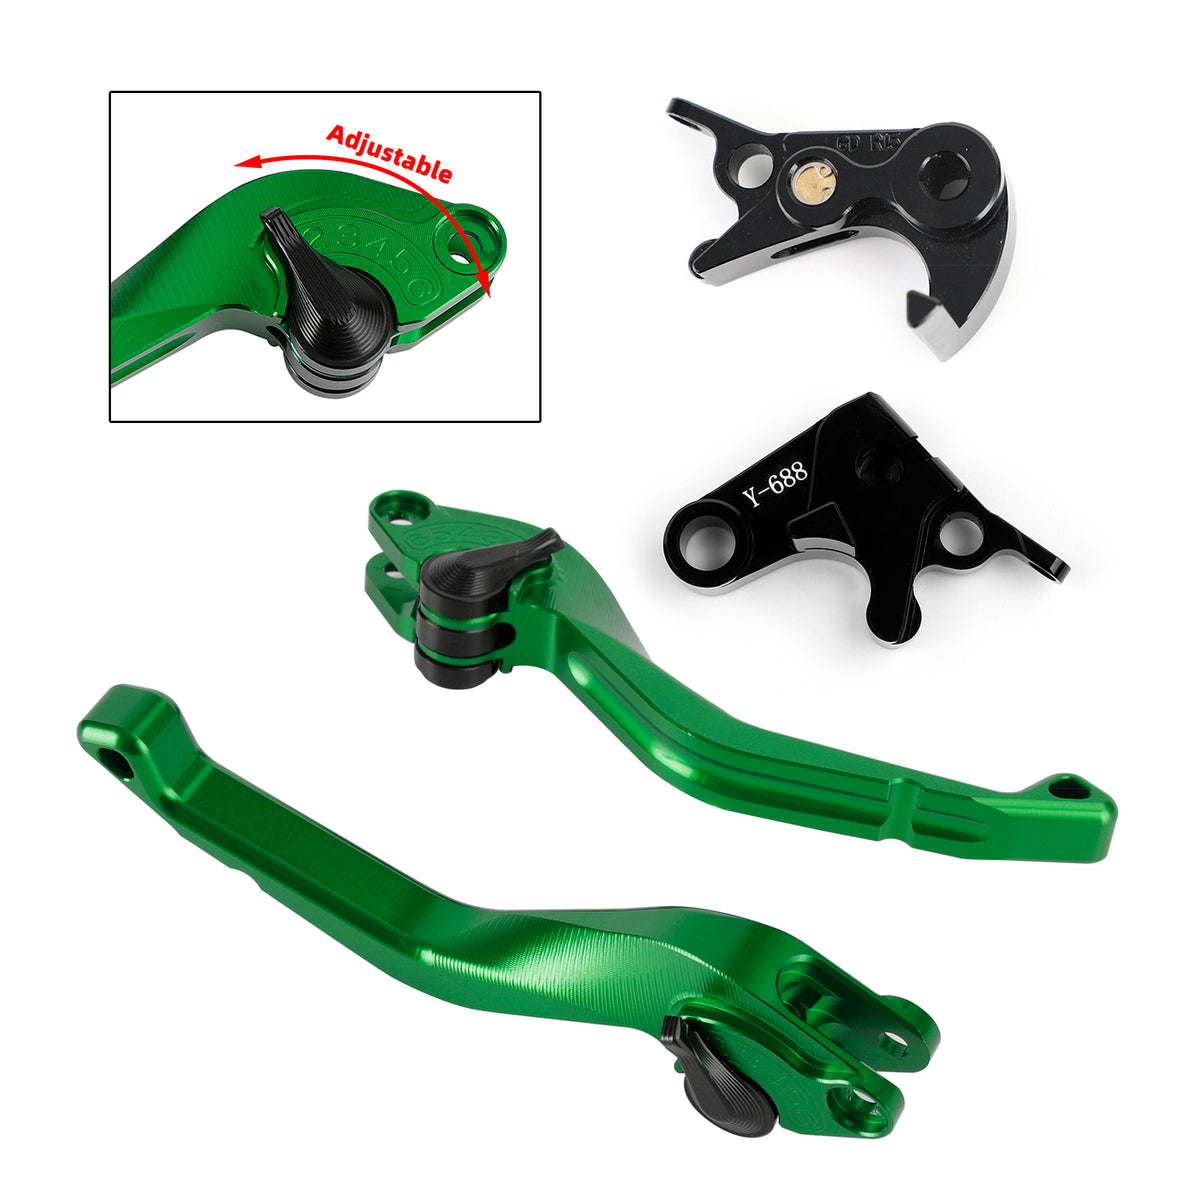 CNC Short Clutch Brake Lever fit for Yamaha YZF R1 R1S R6  MT-09/SP Tracer